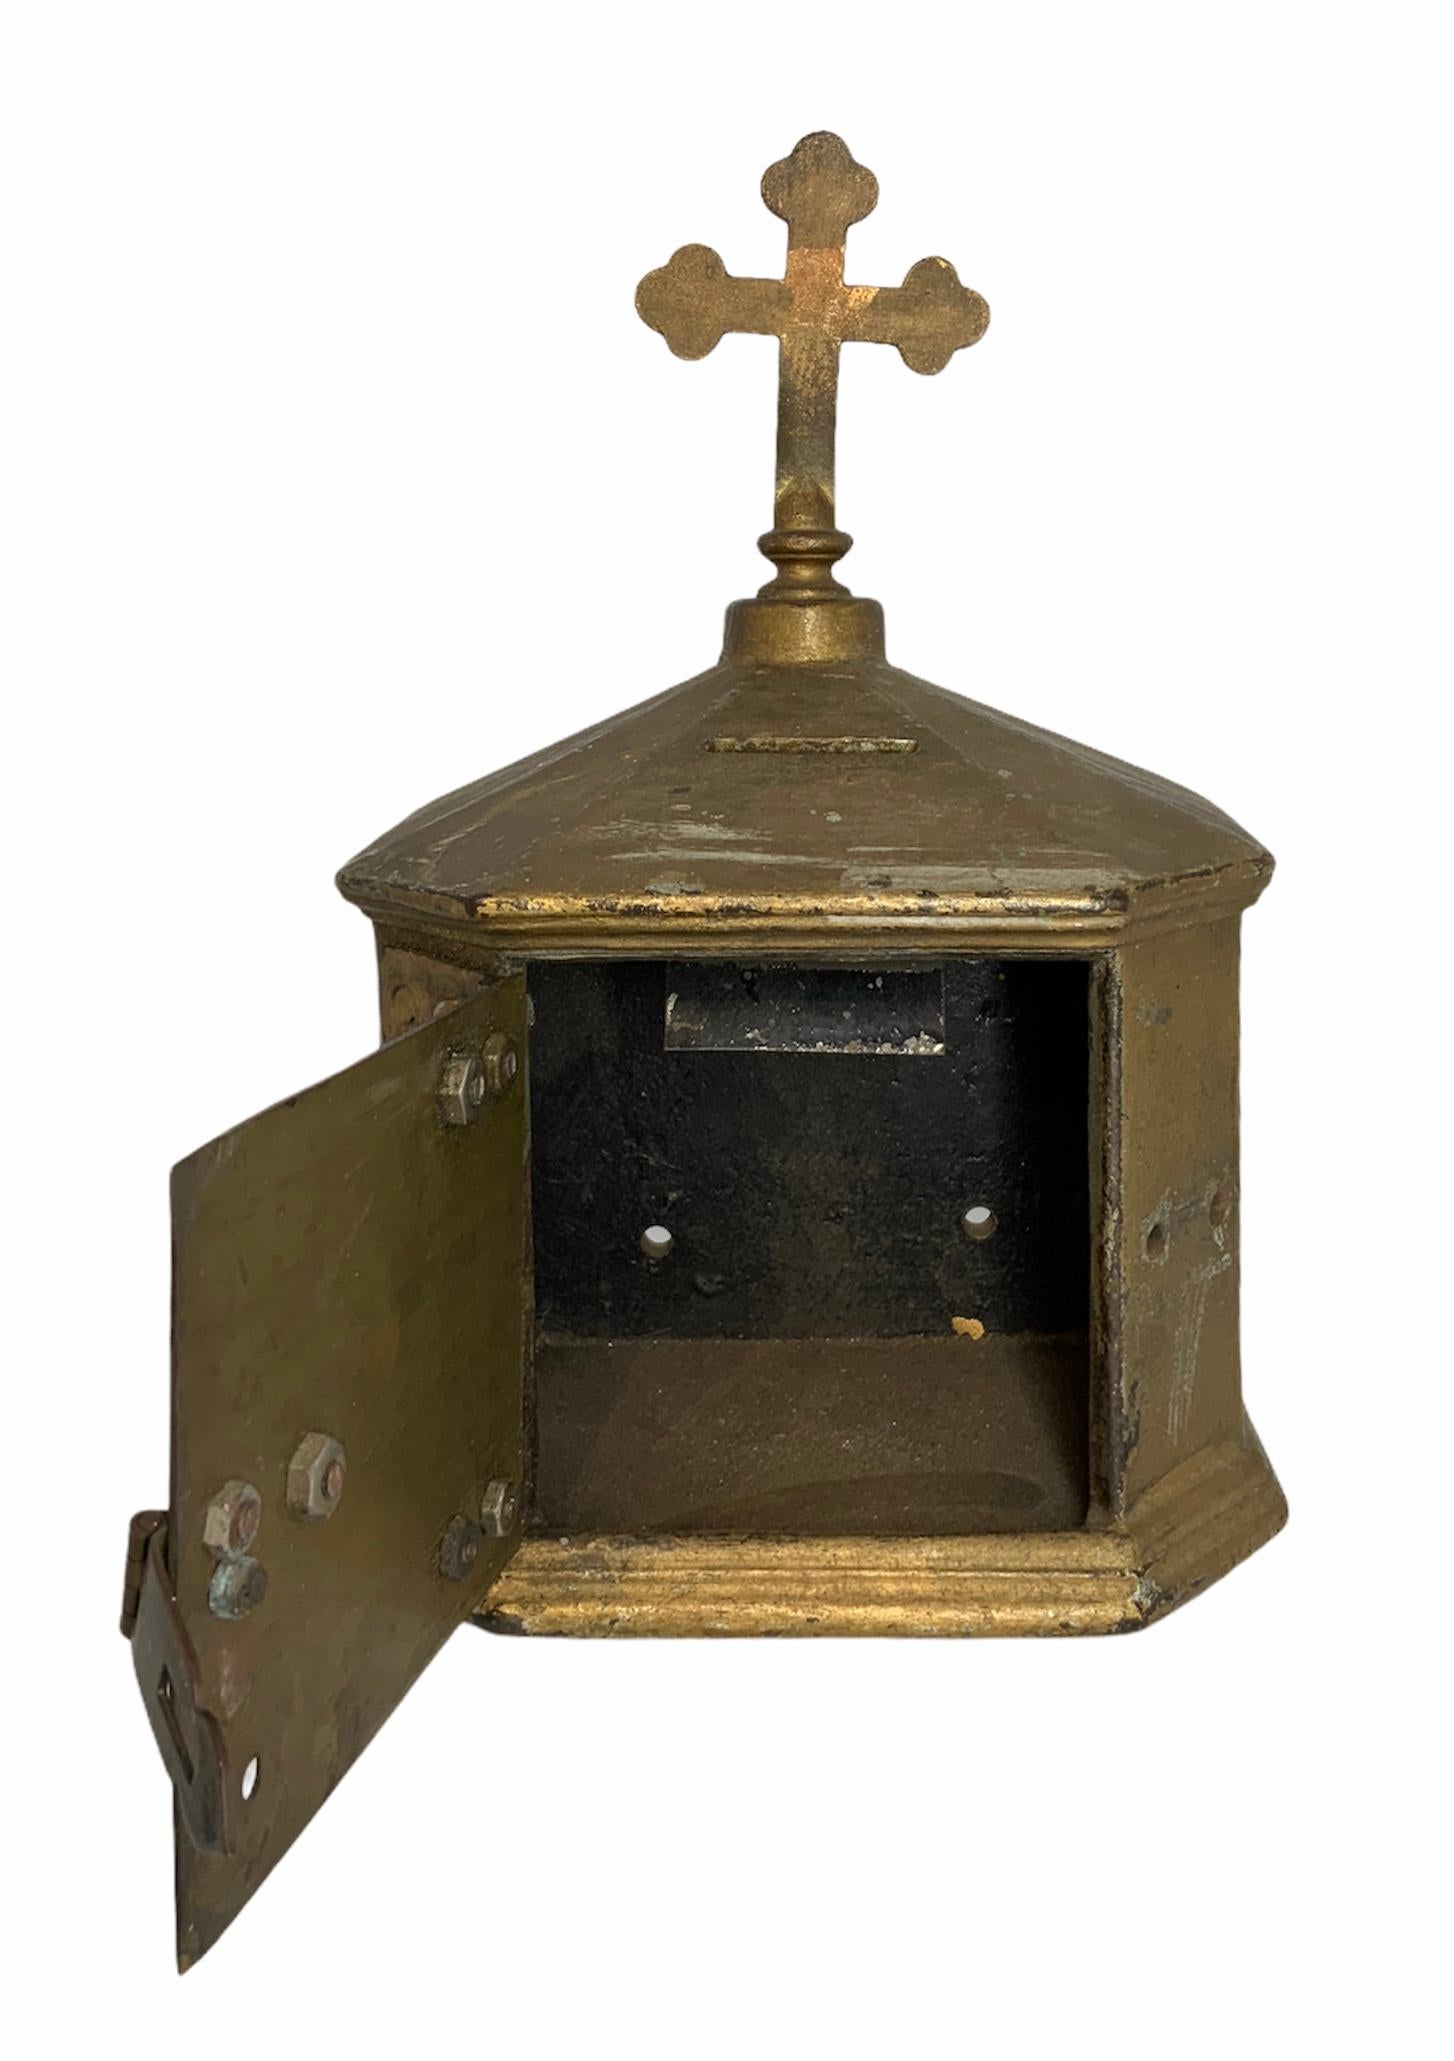 A gilt bronze Catholic Church poor box built as a pentagon. Its ceiling is adorned with a budded cross that symbolizes the Trinity. The box was usually located by the door in order for the faithful donate or provide coins and then, the priests and